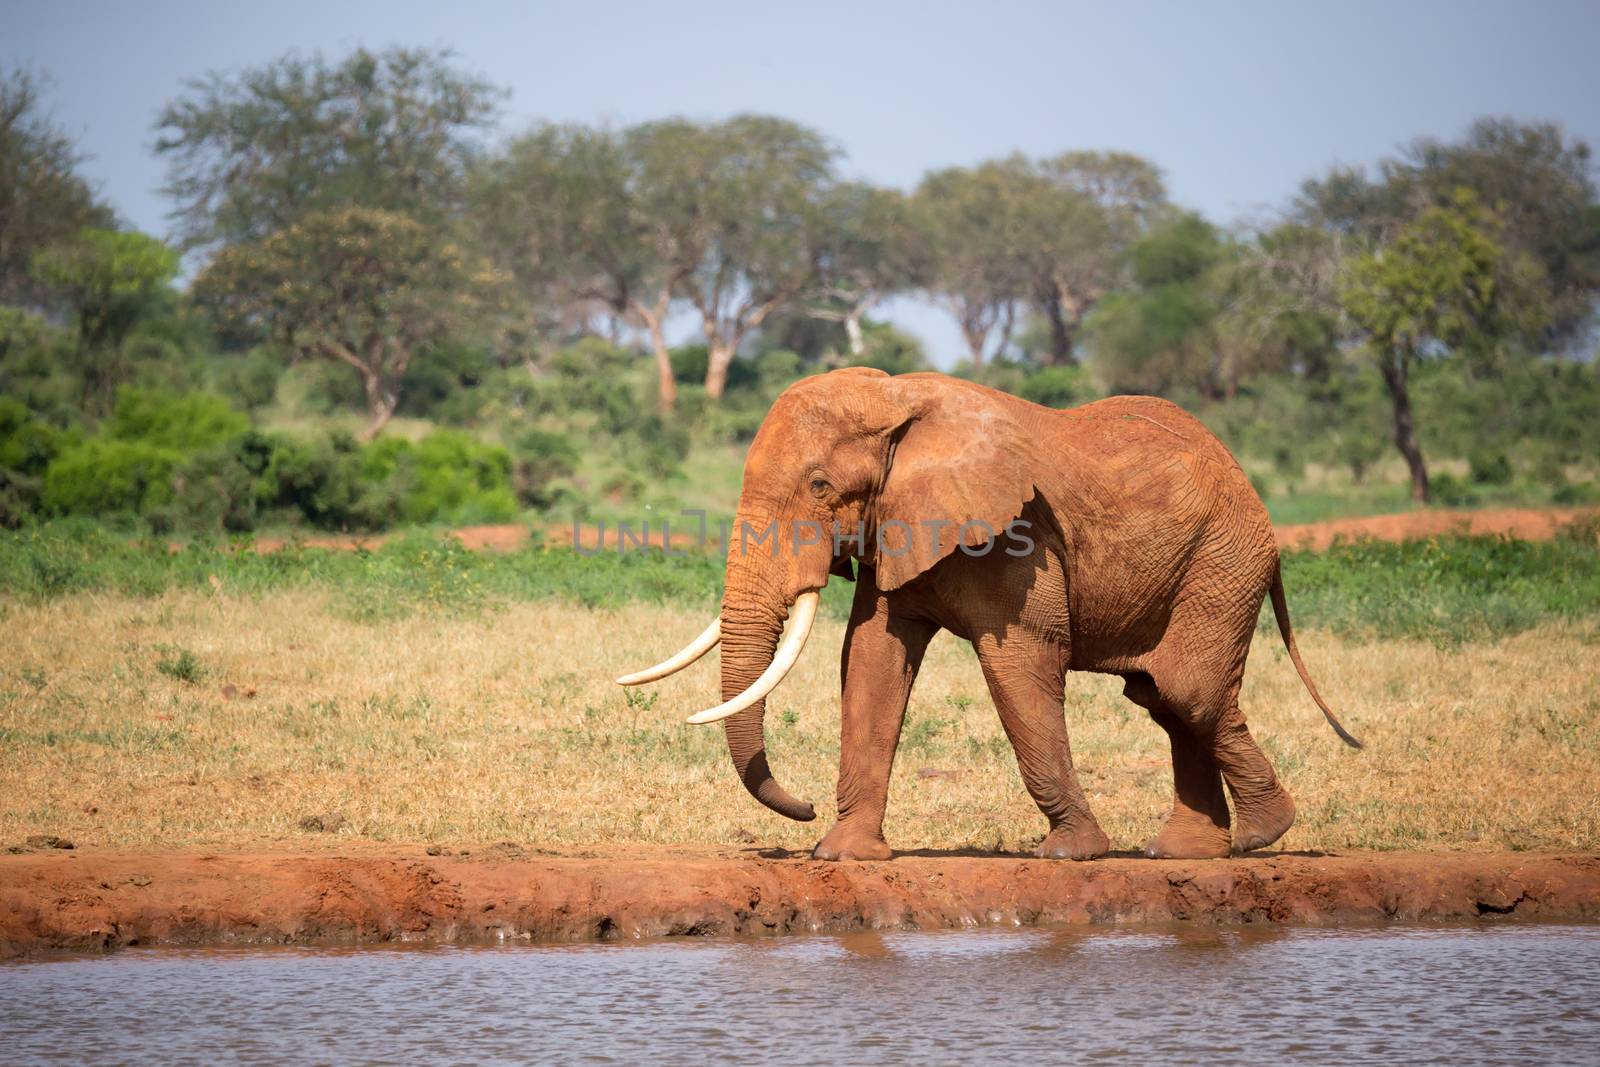 One big red elephant is walking on the bank of a water hole